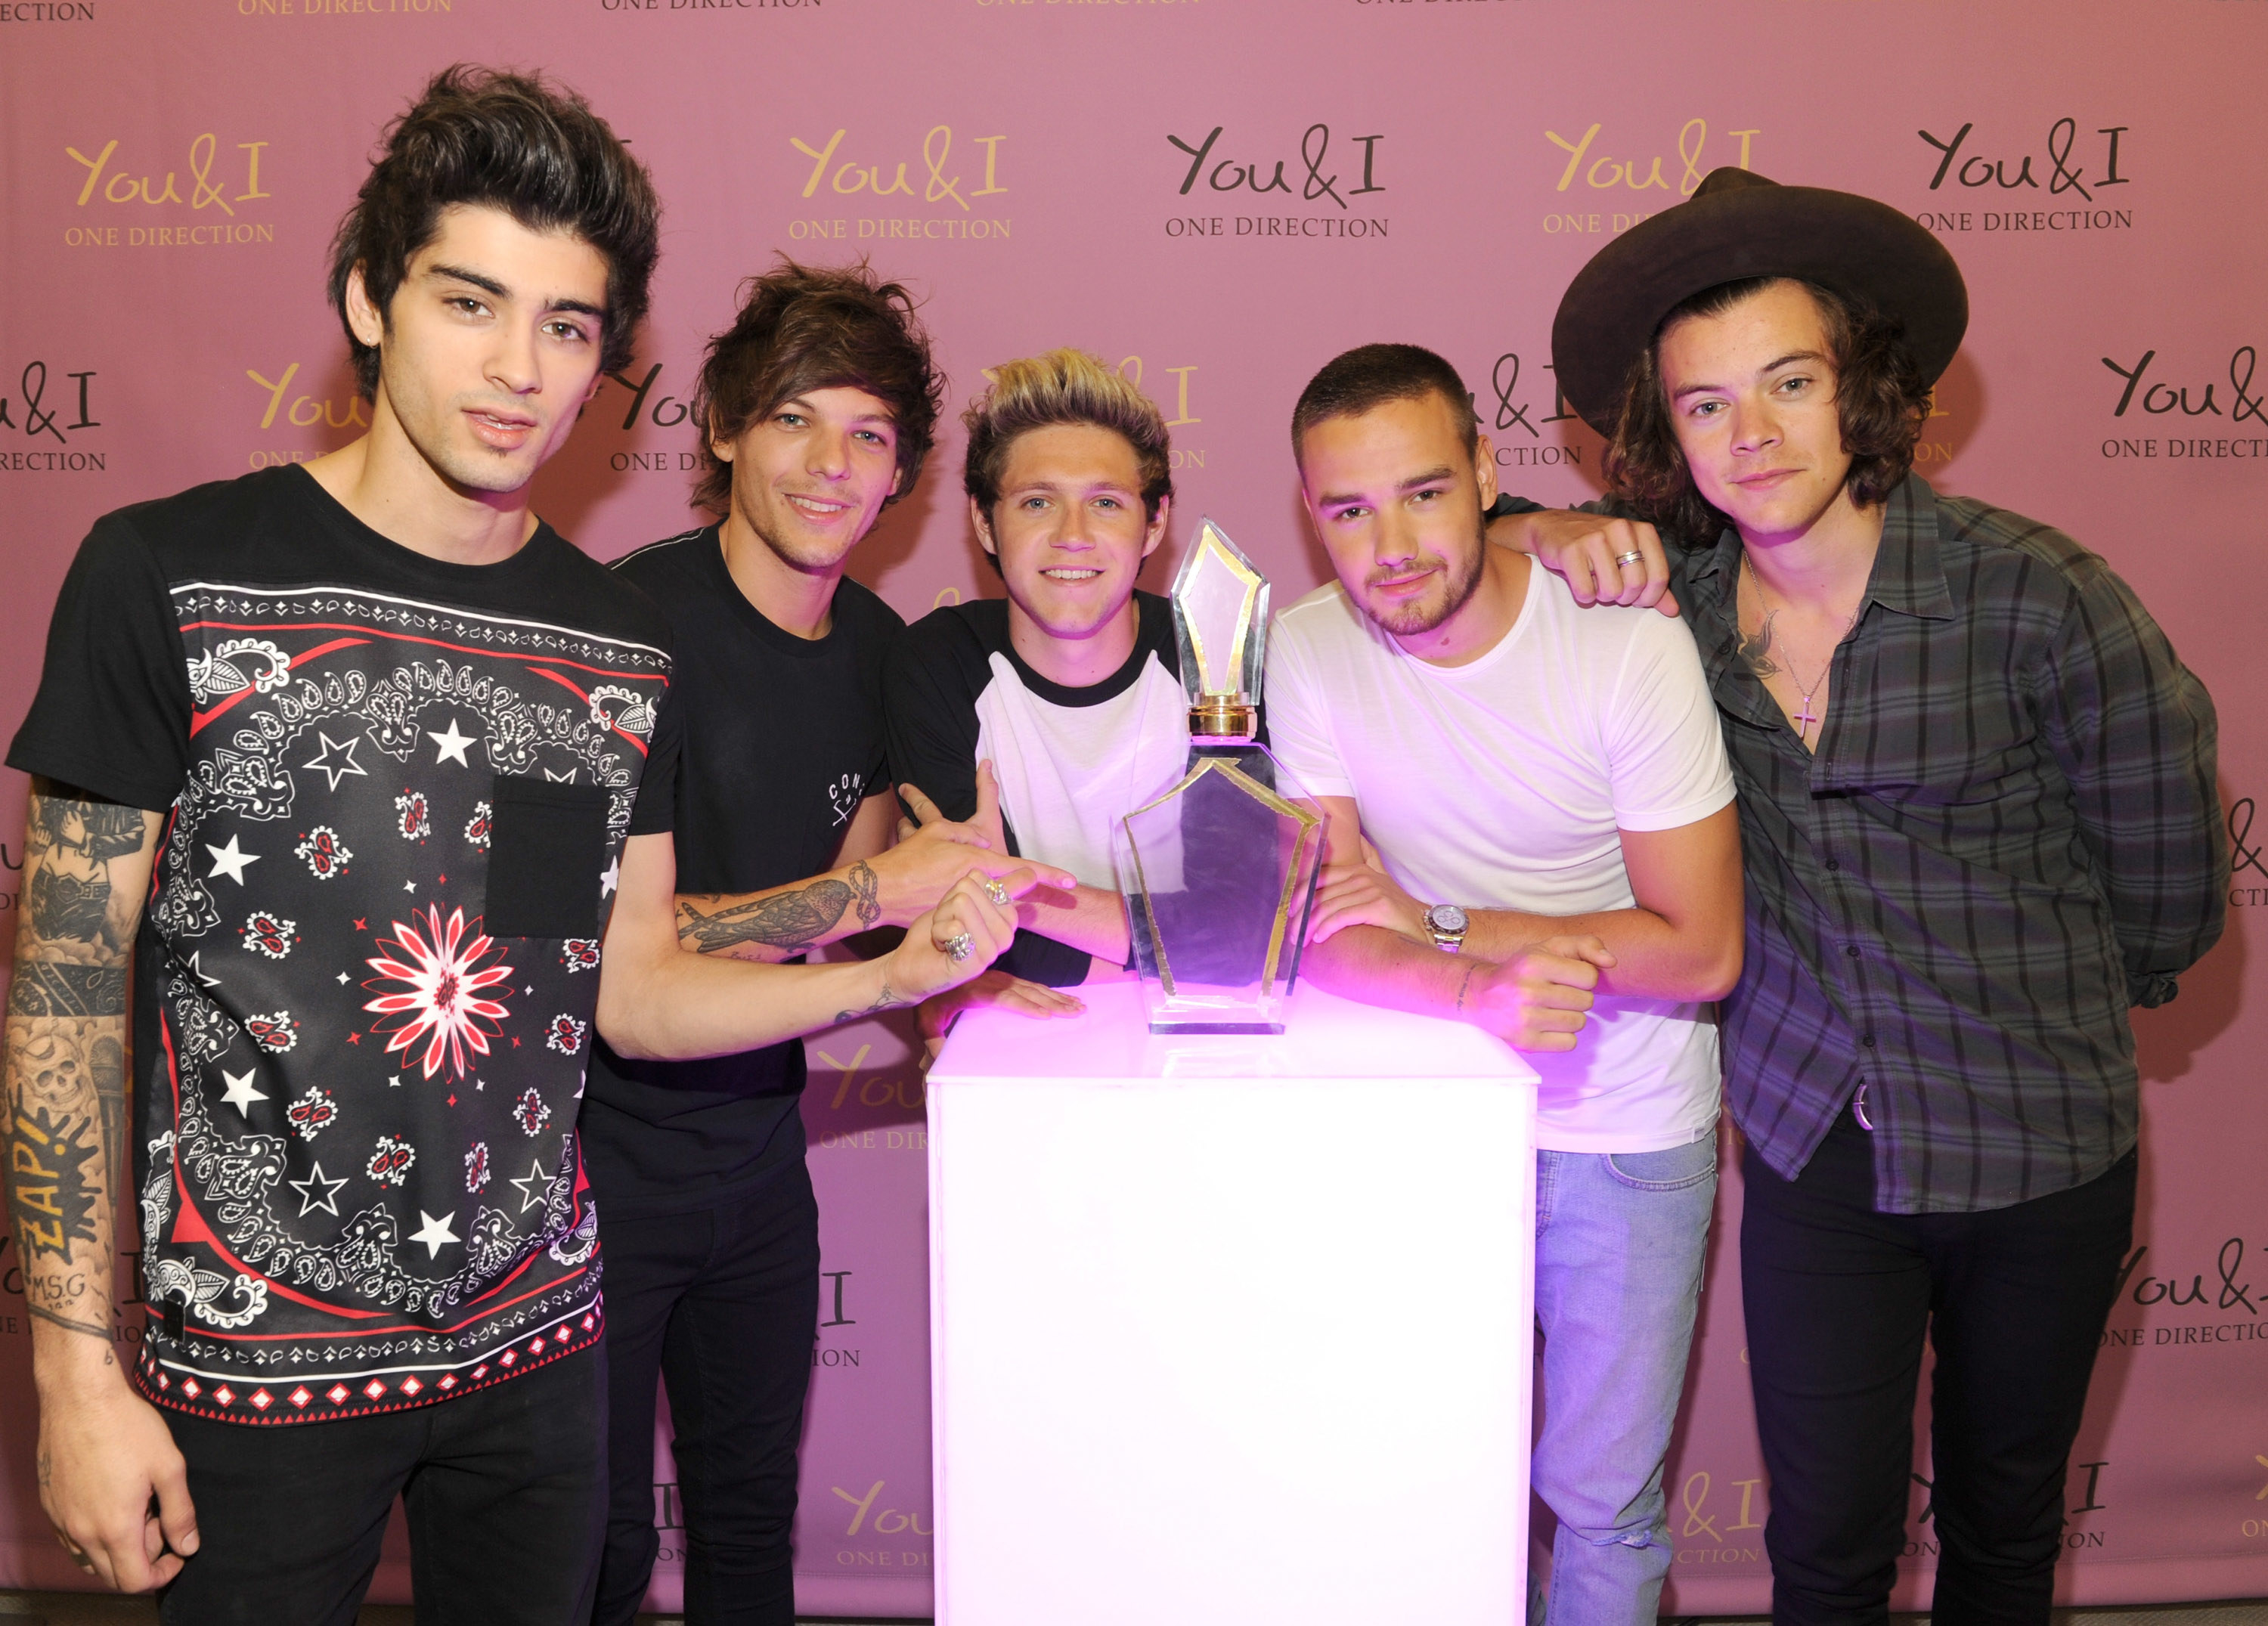 One Direction posing together for a photo at an event